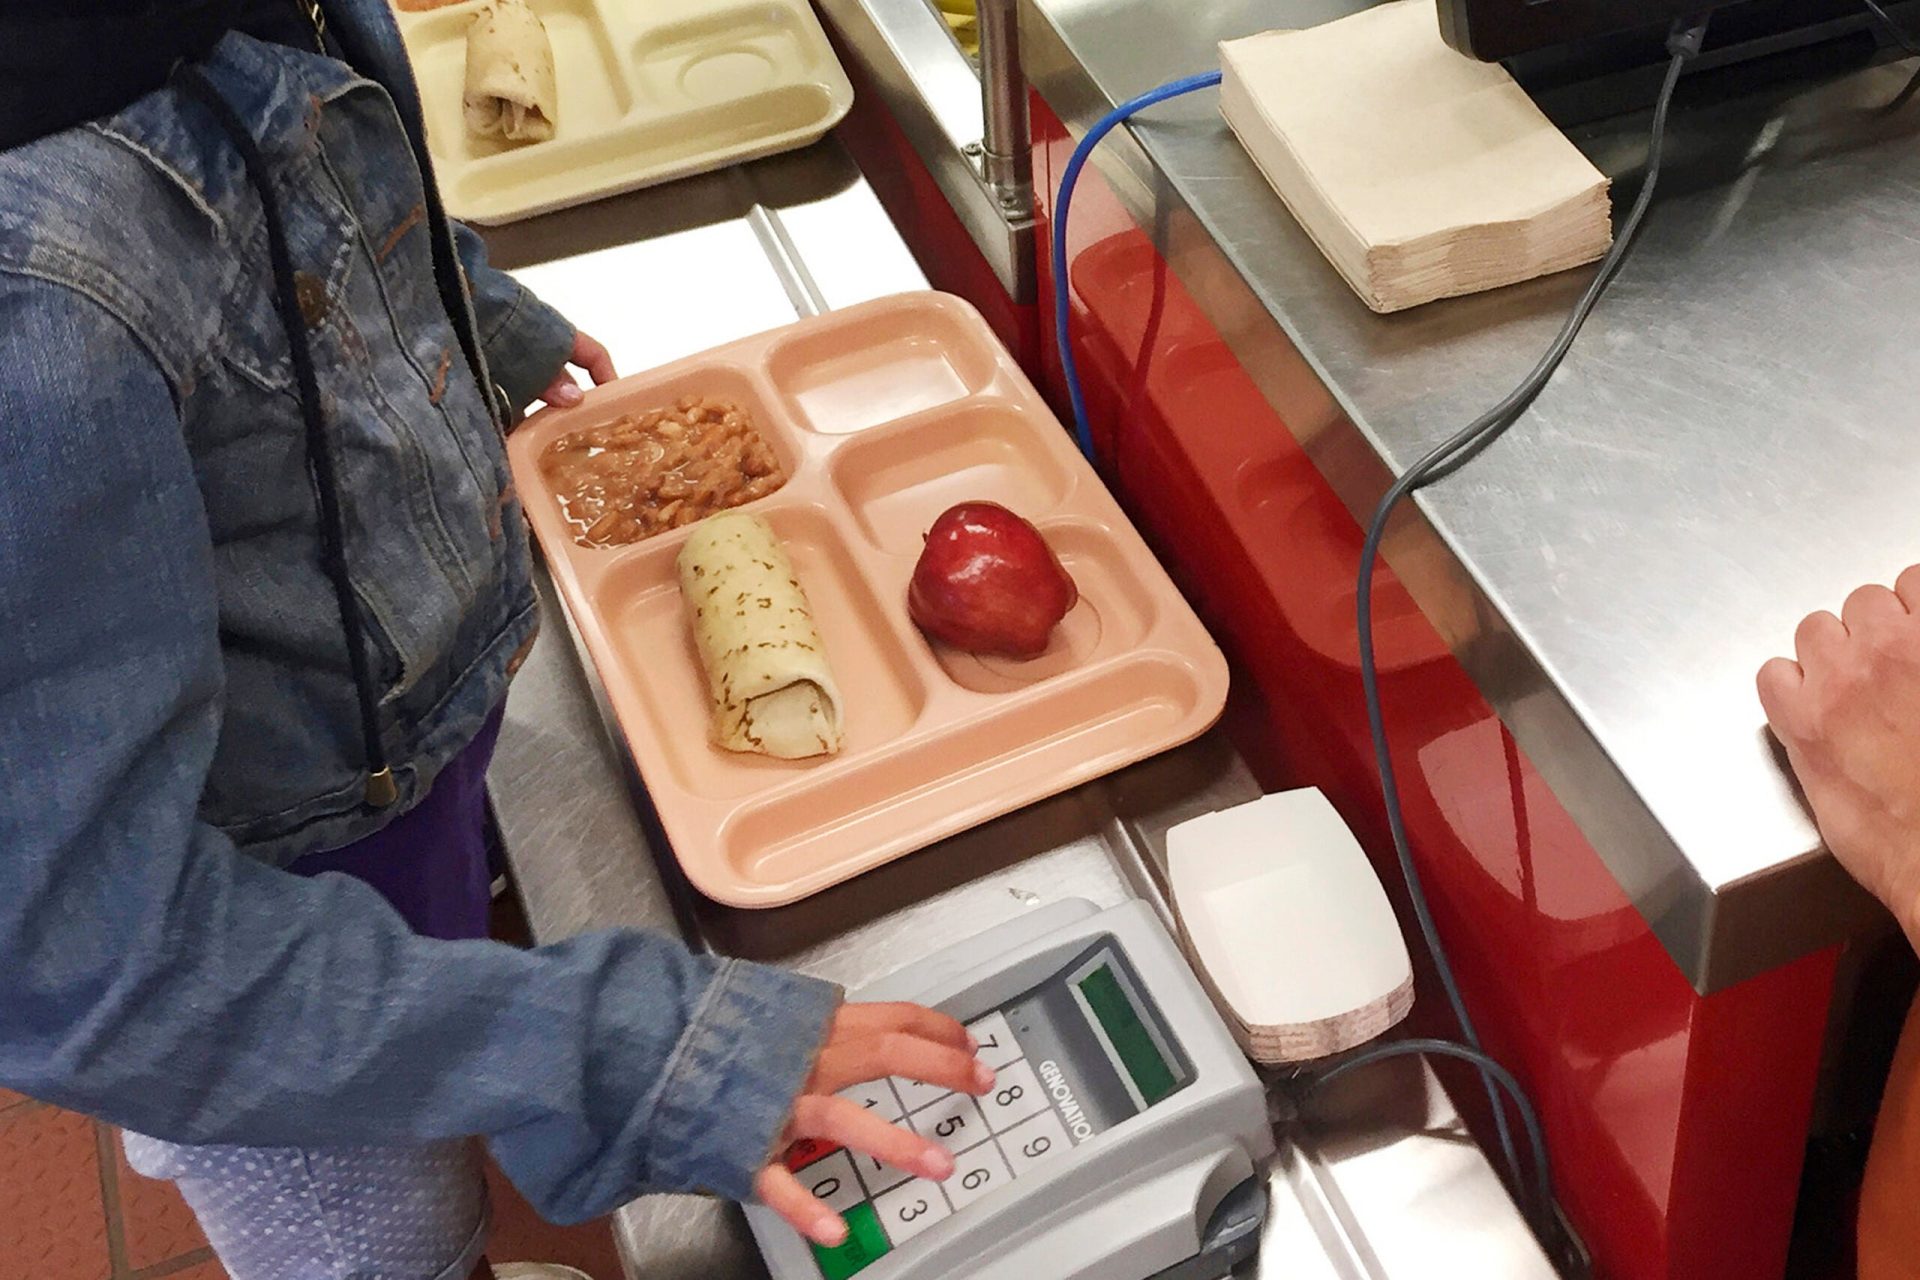 School Lunches Are Imperative For Many Students